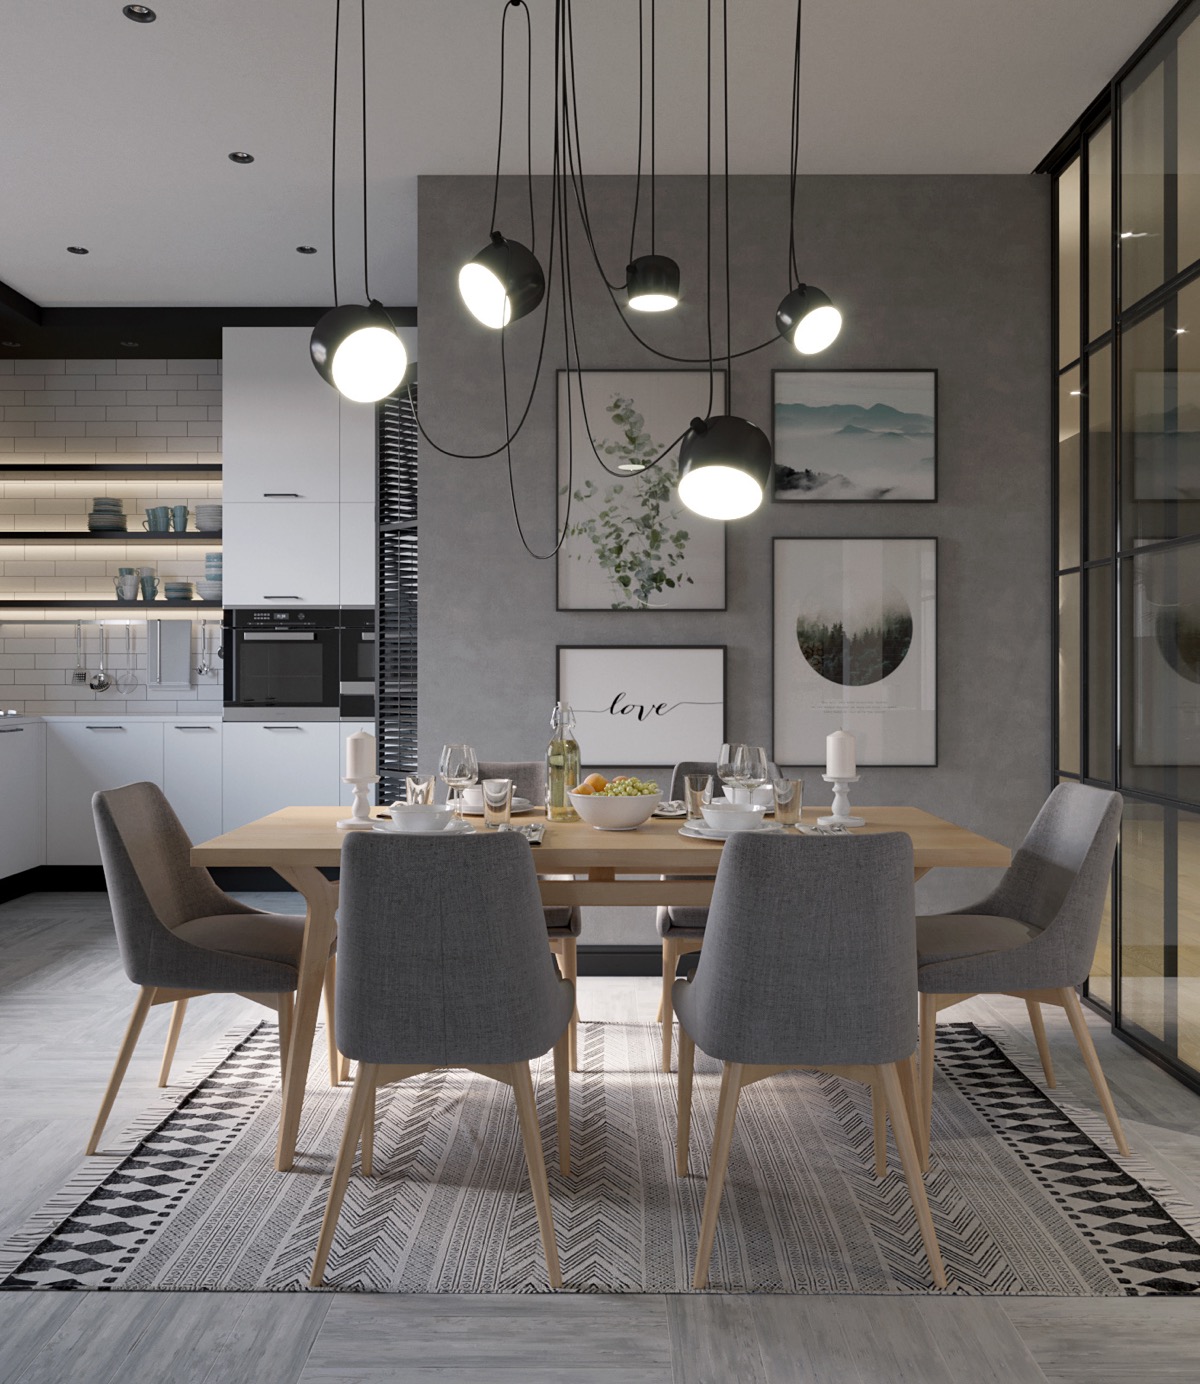 51 Grey Dining Rooms With Tips To Help You Decorate And Accessorize Yours - How To Decorate A Dining Room With Grey Walls